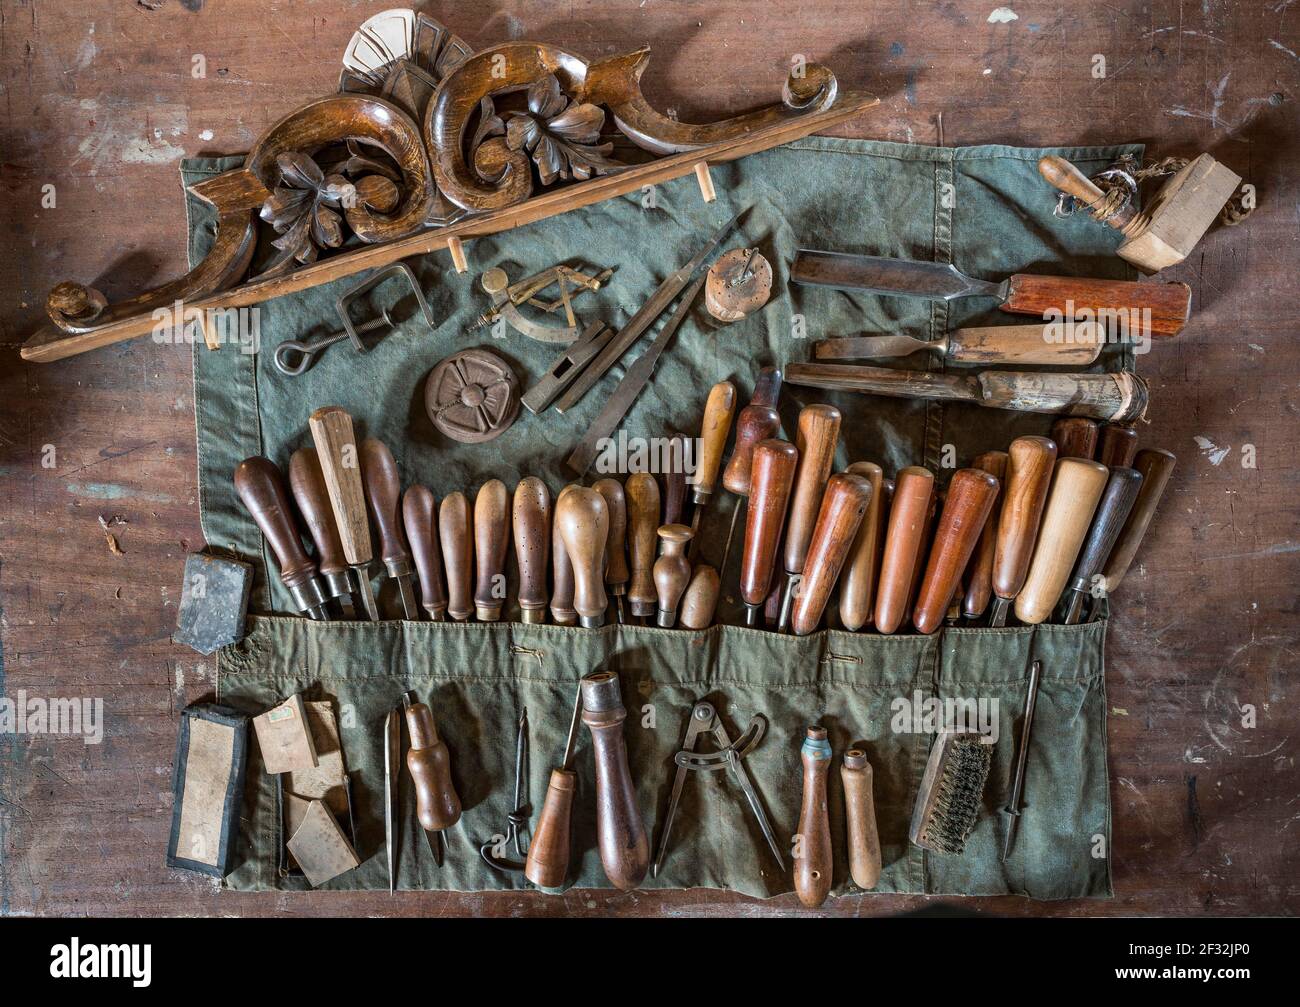 Tool bag with carving tool, dechsel tool and carved founder time attachment, handicraft, Siegen, North Rhine-Westphalia, Germany Stock Photo